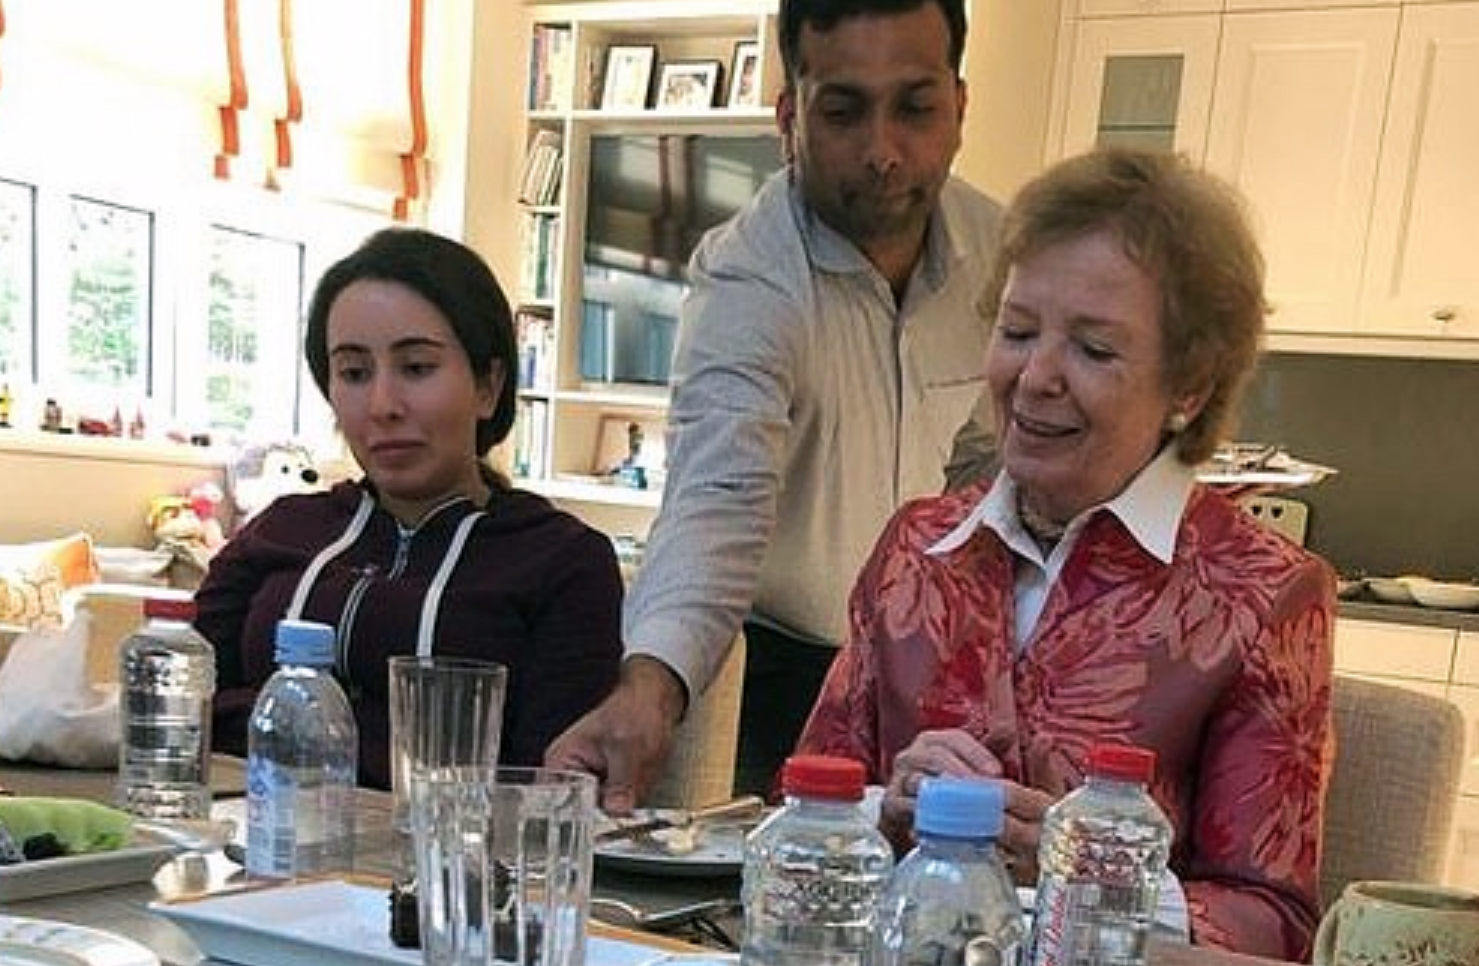 Princess Sheikha Latifa bint Mohammed al-Maktoum with the former United Nations High Commissioner for Human Rights and former Irish President Mary Robinson.